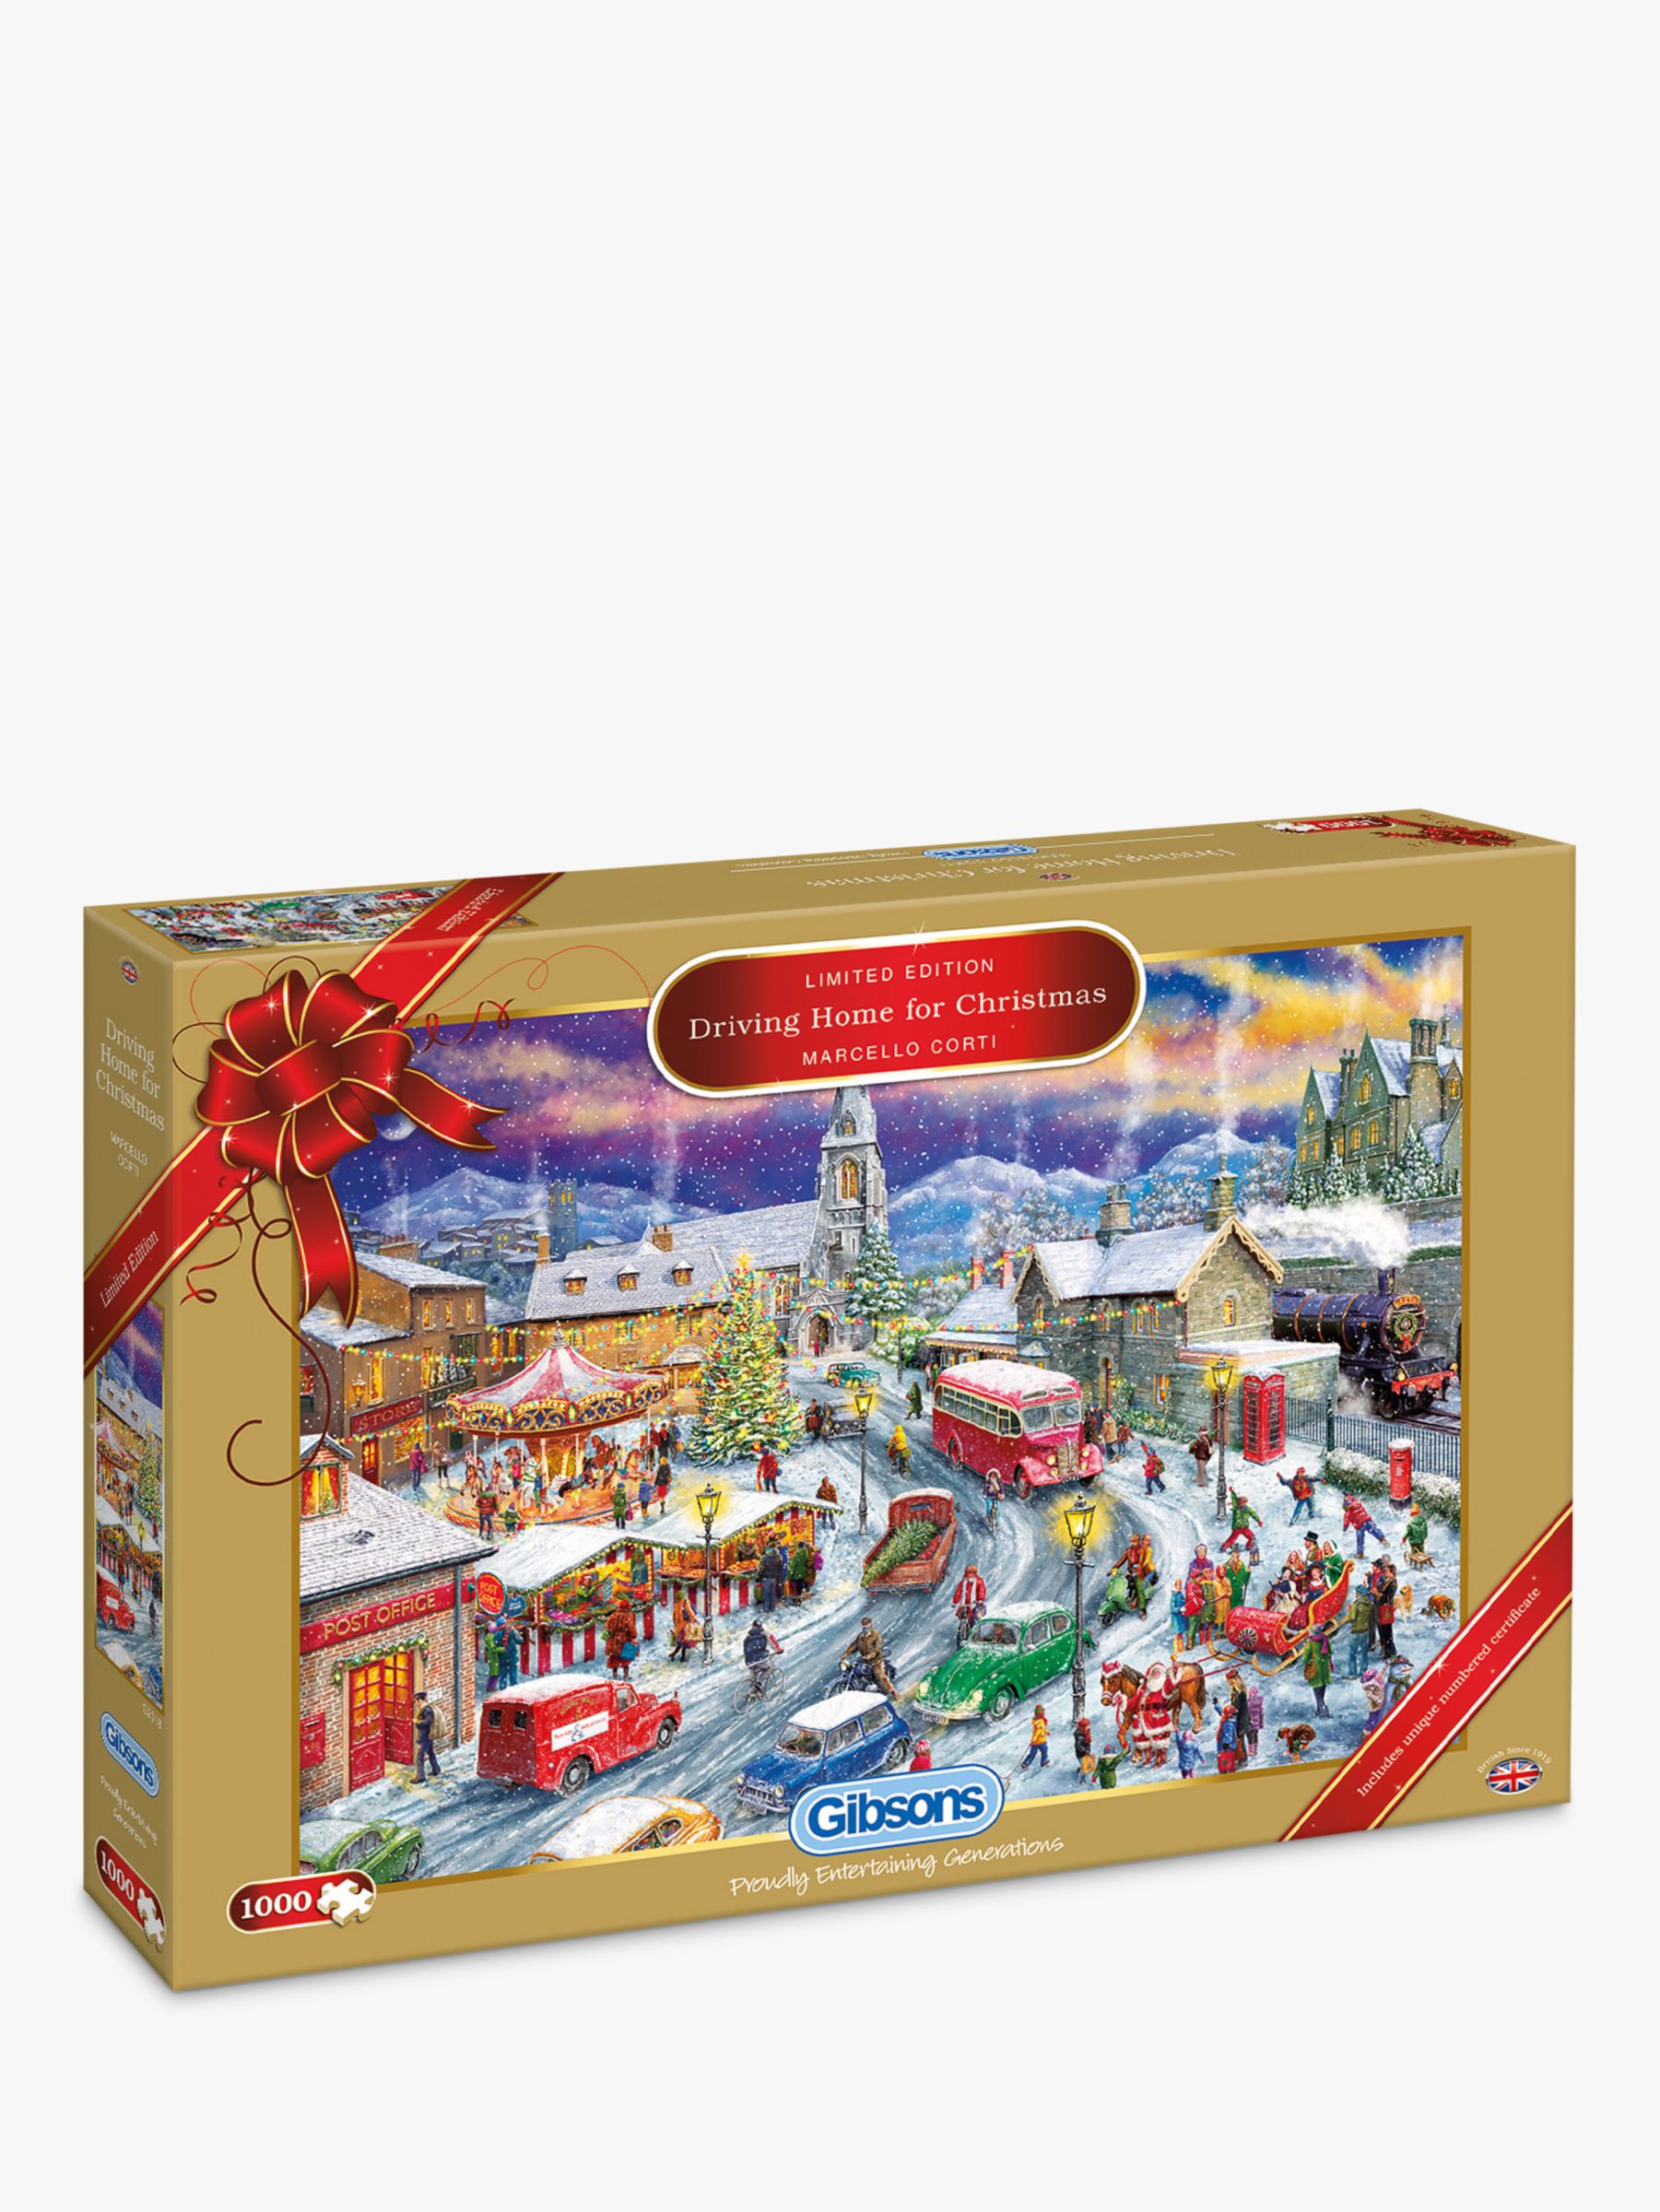 Gibsons Driving Home for Christmas Jigsaw Puzzle, 1000 Piece